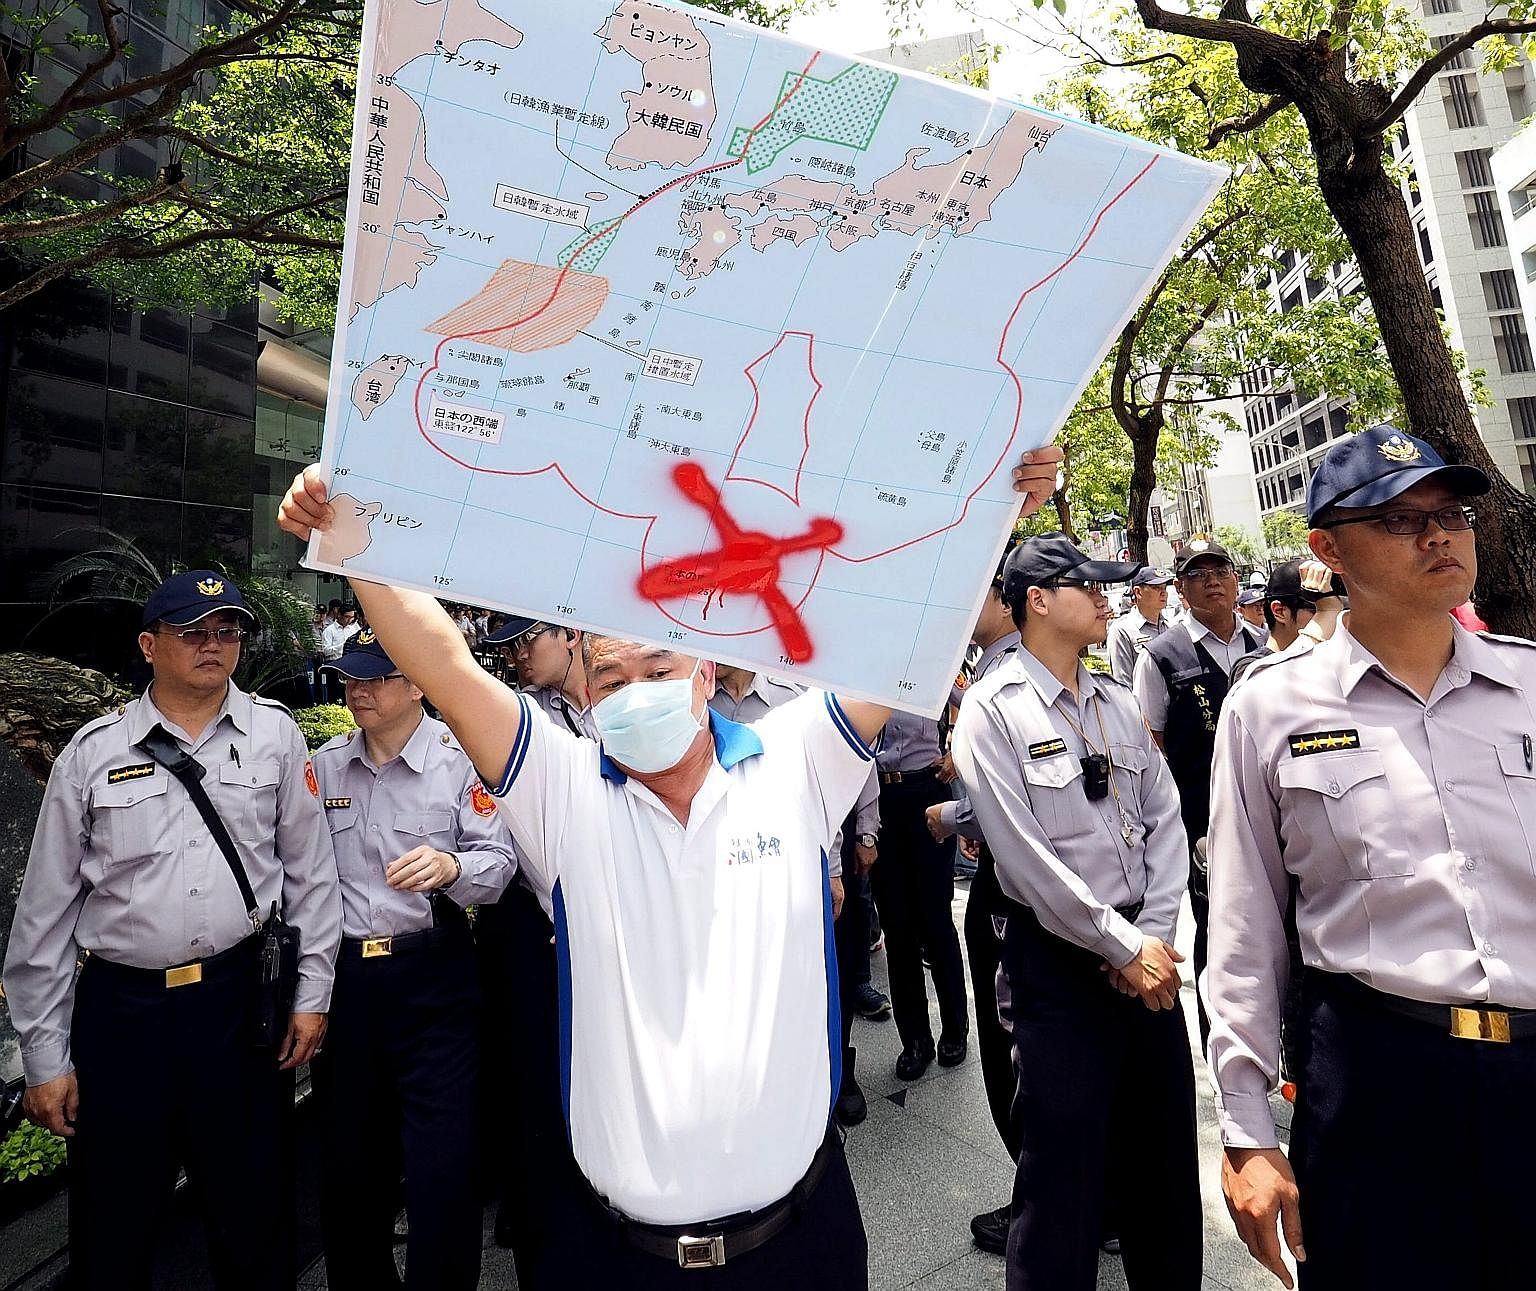 A Taiwanese fisherman with a map showing the location of Okinotorishima Island crossed out, during a protest last month over Japan's seizure of a Taiwanese trawler there.